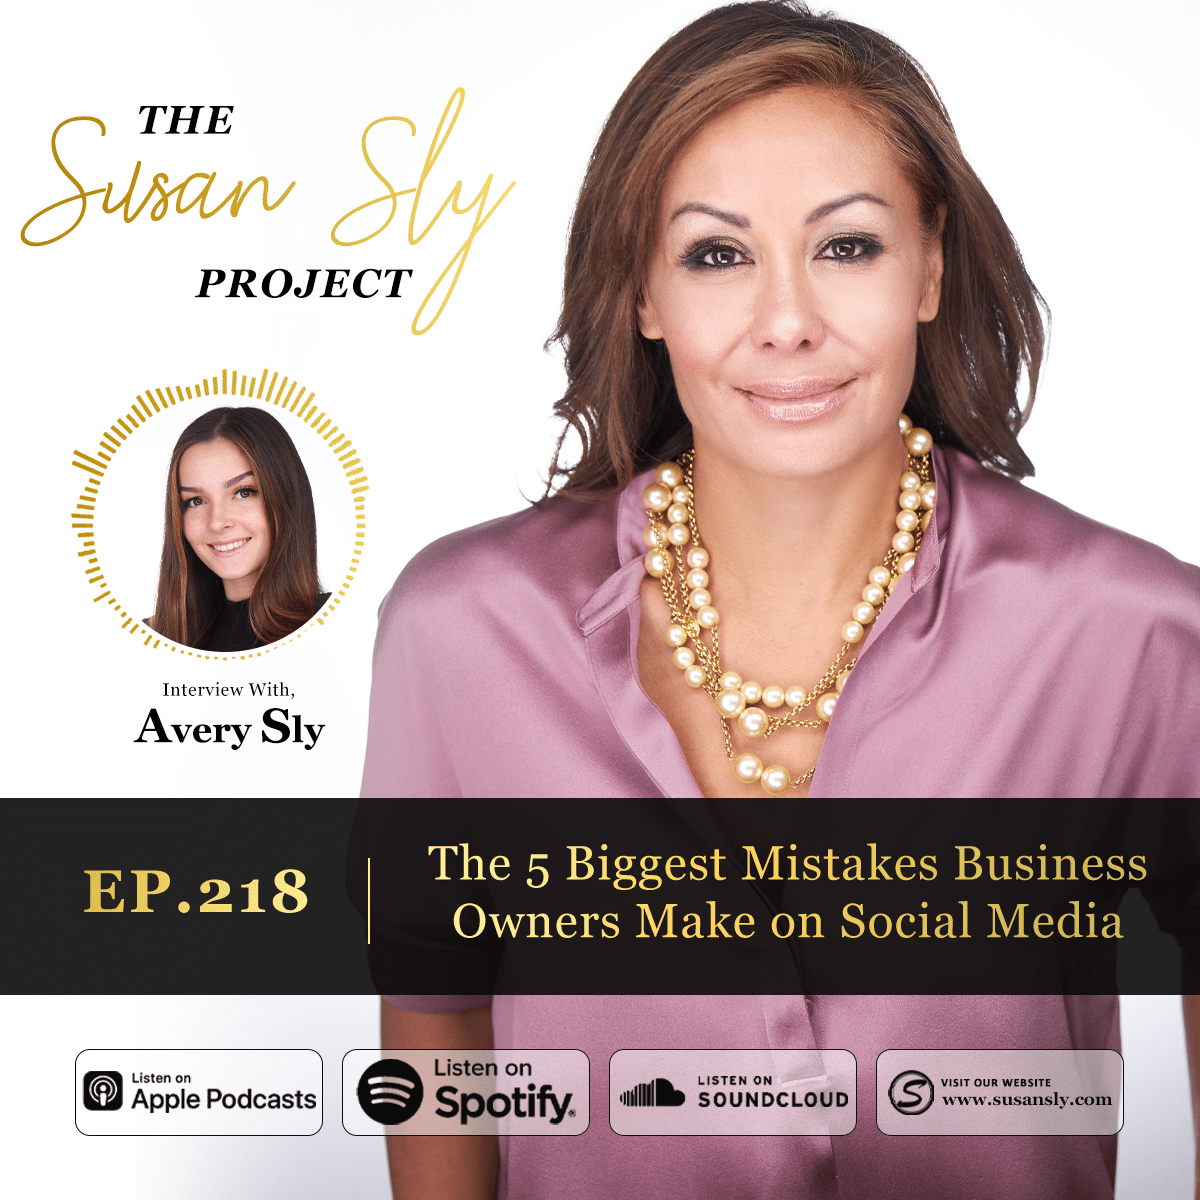 Susan Sly podcast interview with Avery Sly